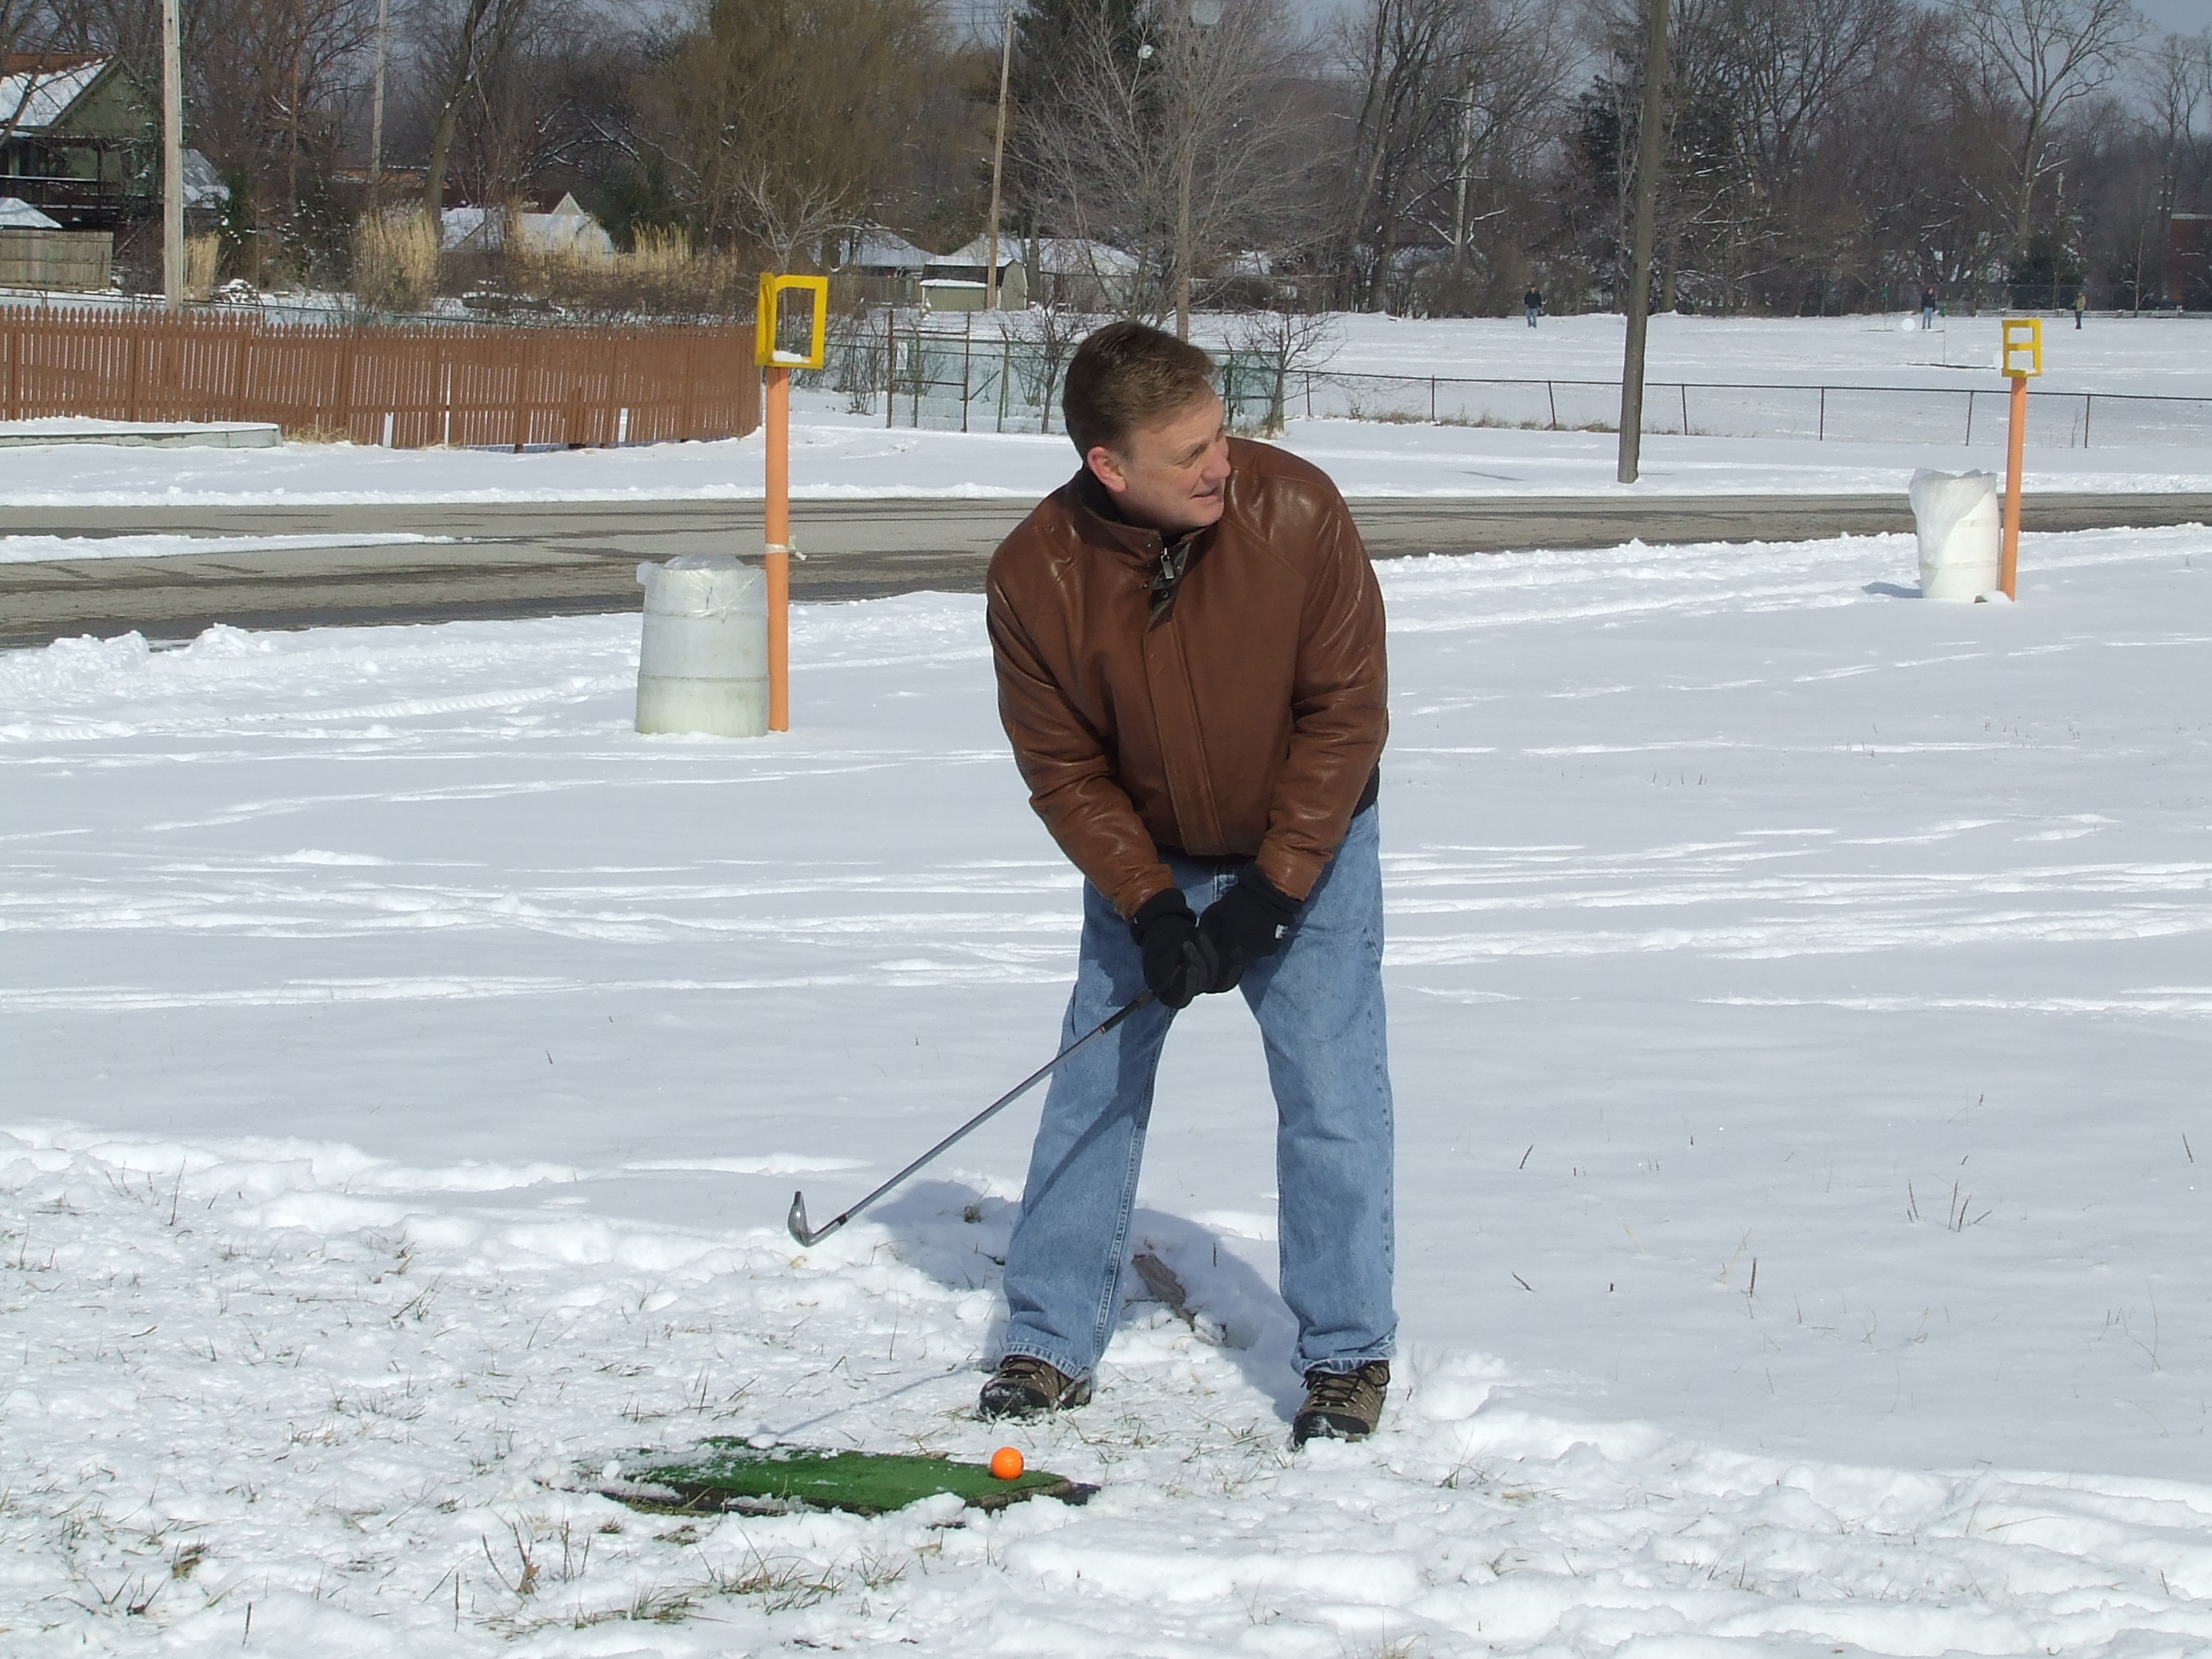 Spring Golf in Minnesota – The Art of Waiting